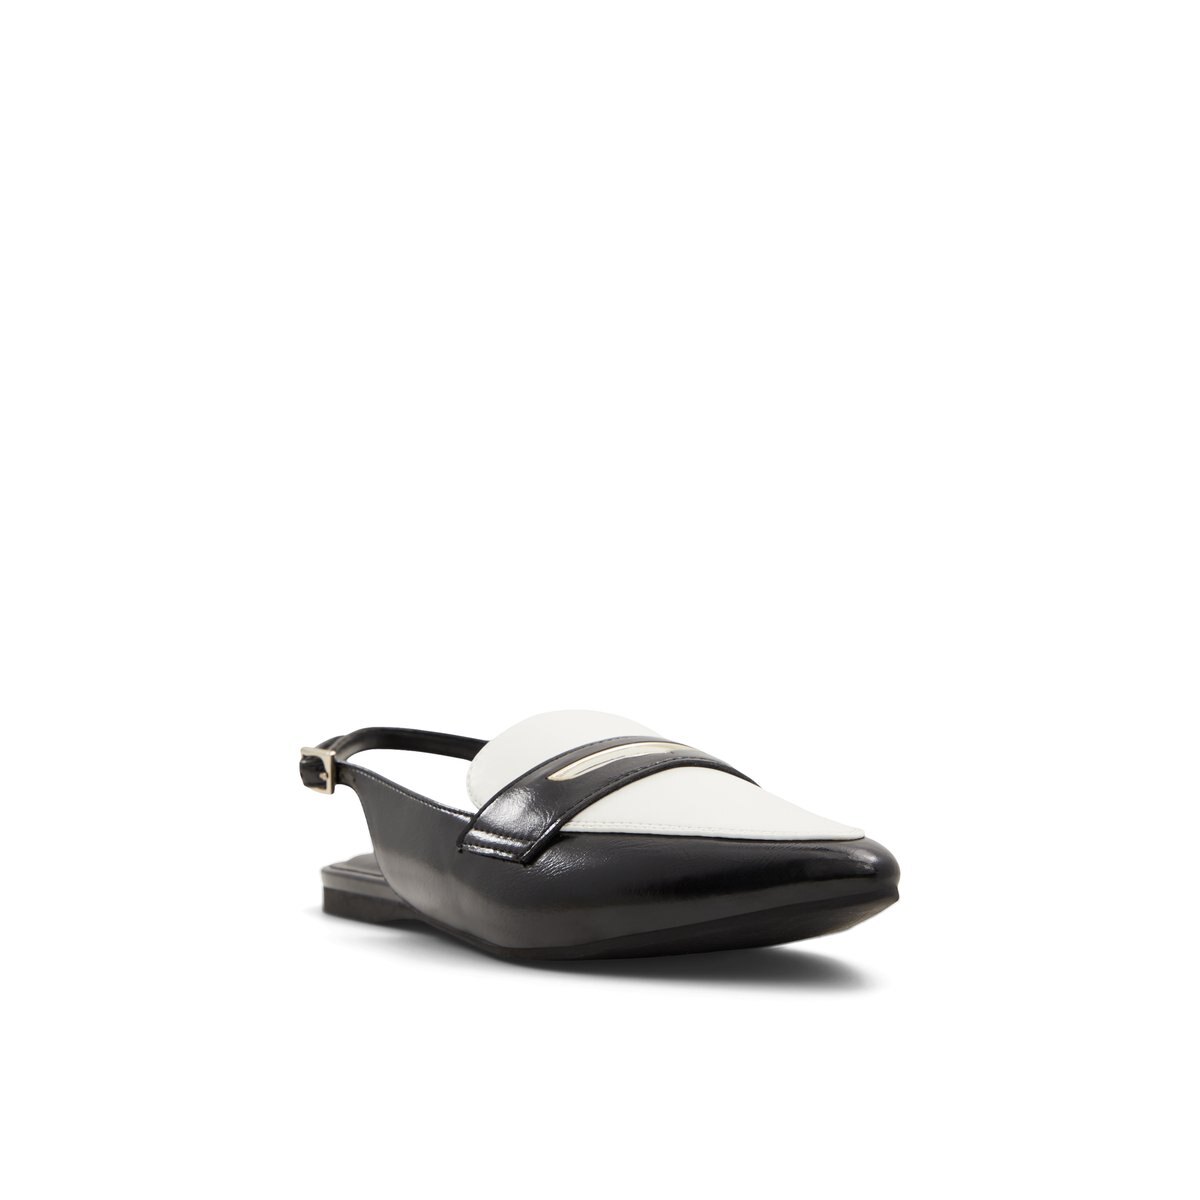 Elodiee Black/White Women's Loafers | Call It Spring Canada